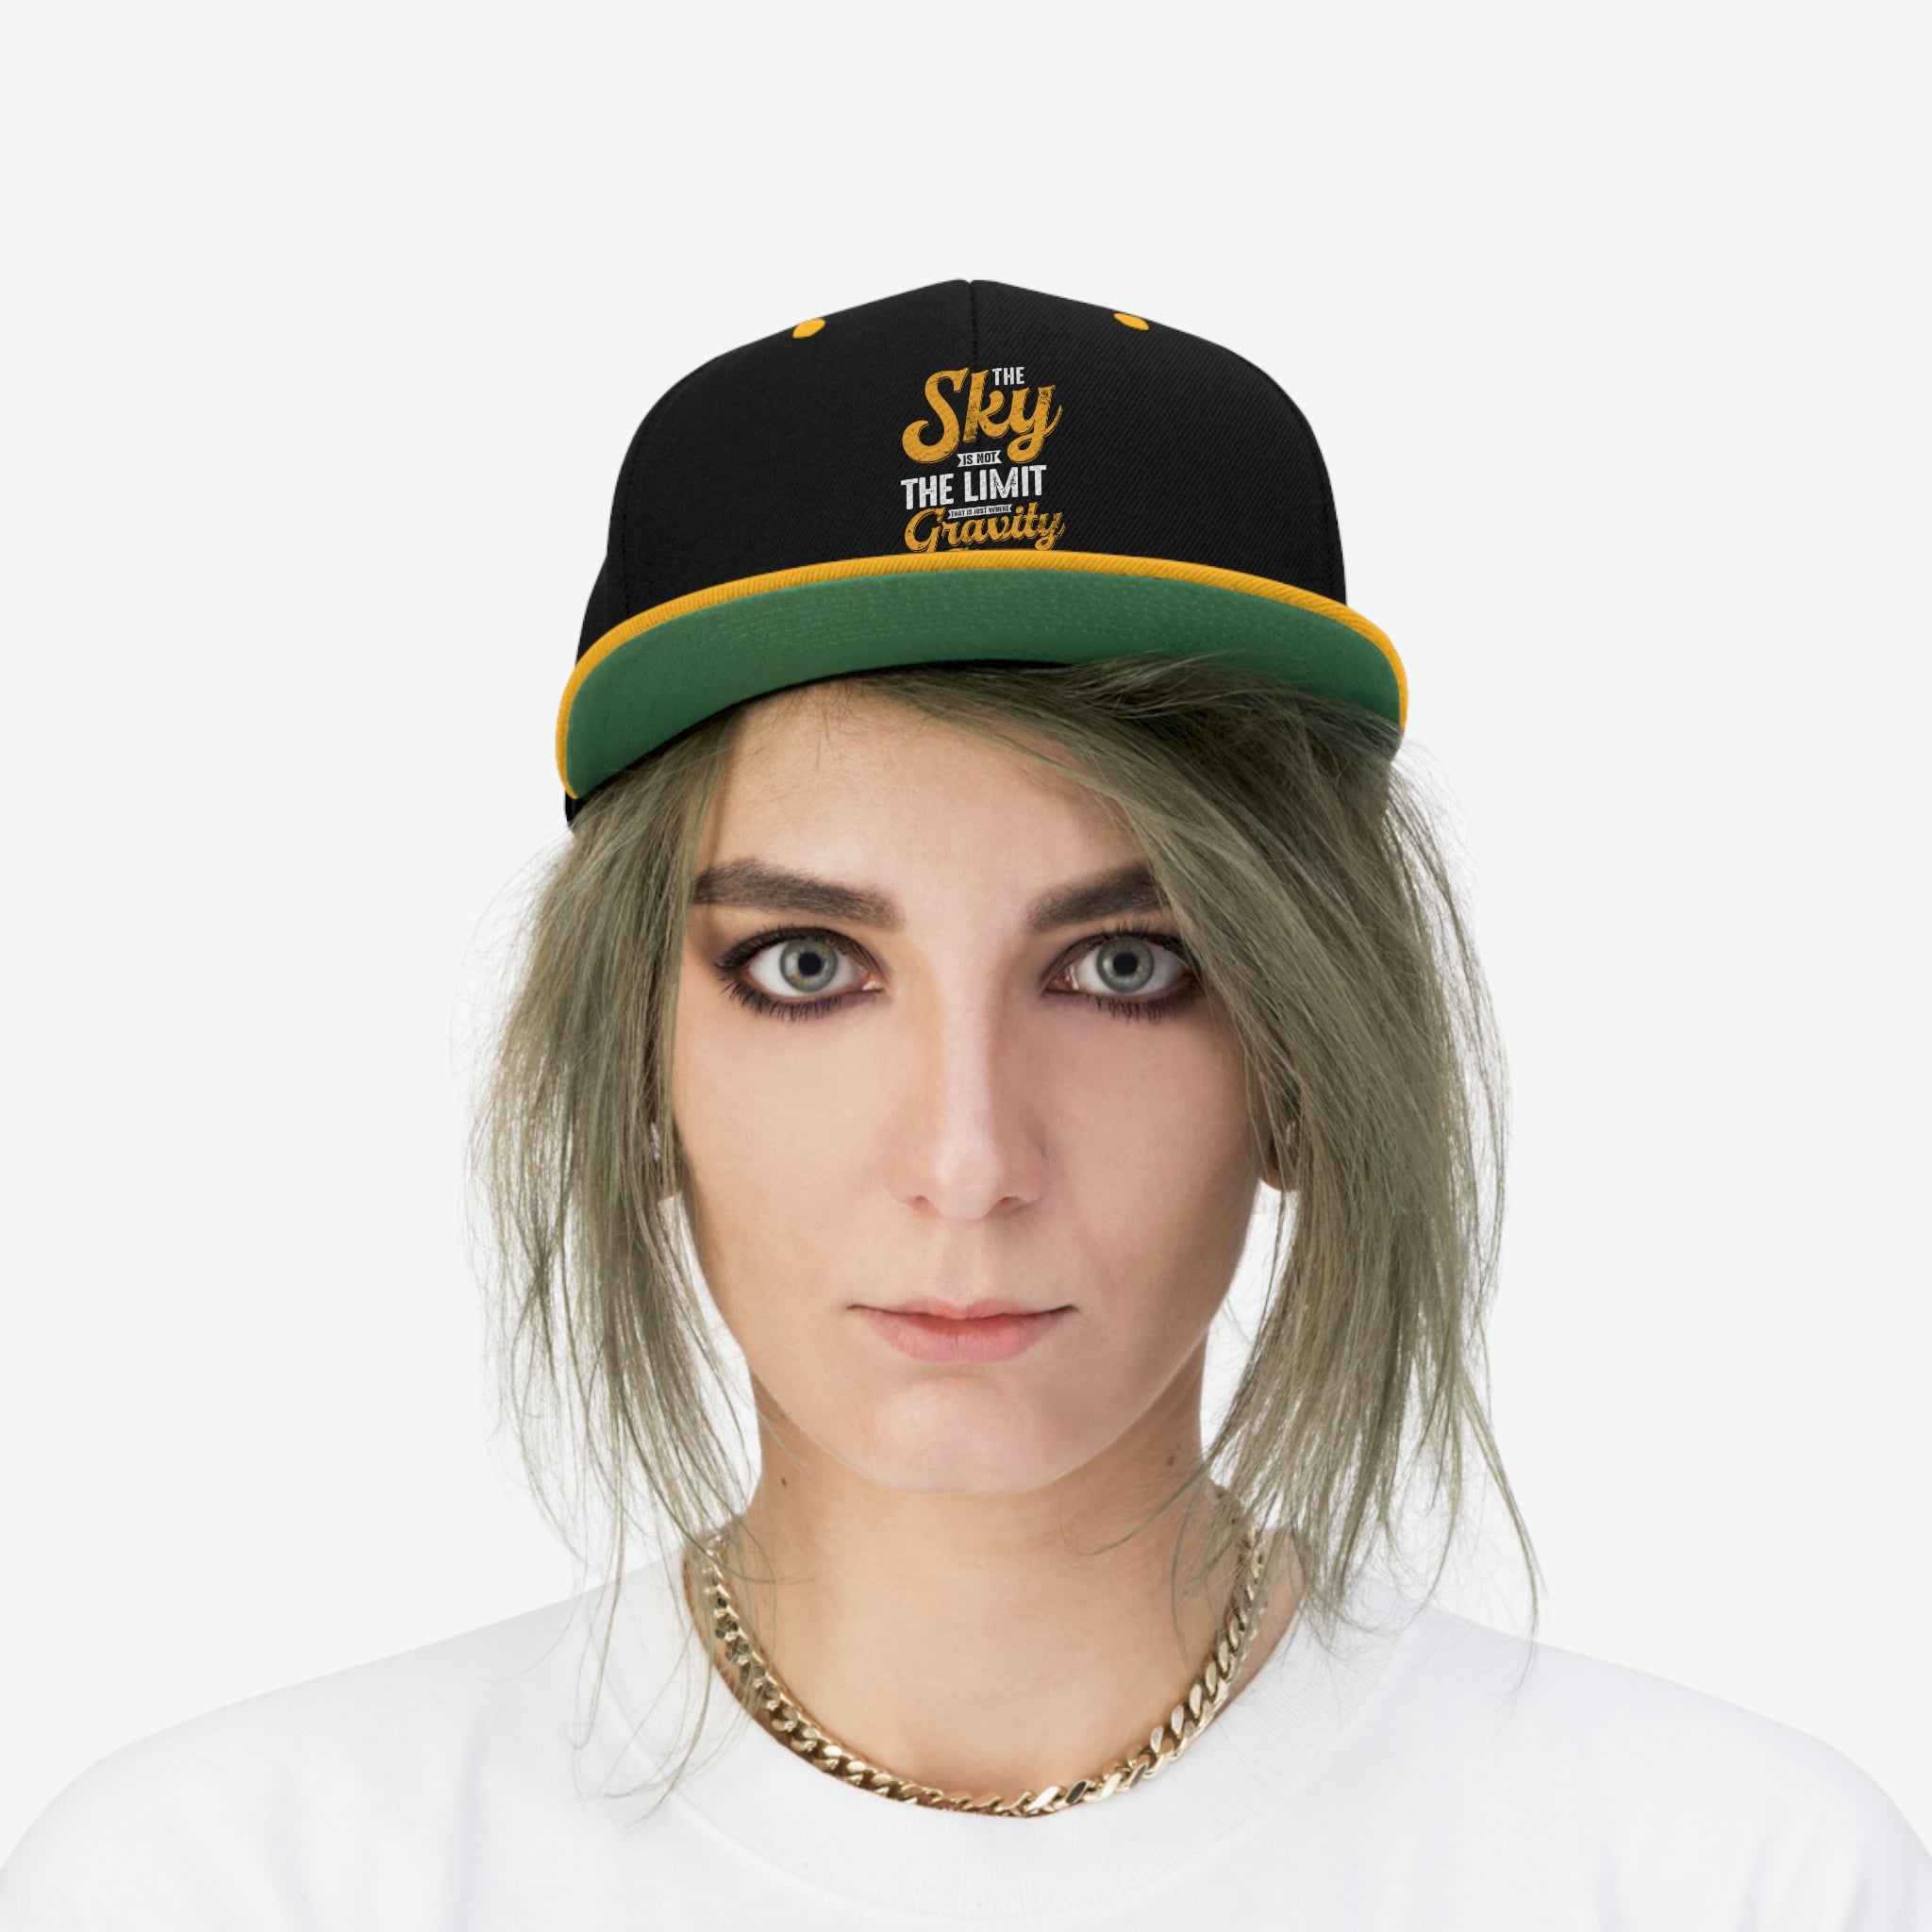 the sky is not the limit that is just where gravity stop (BRAND THIS). Unisex Flat Bill Hat